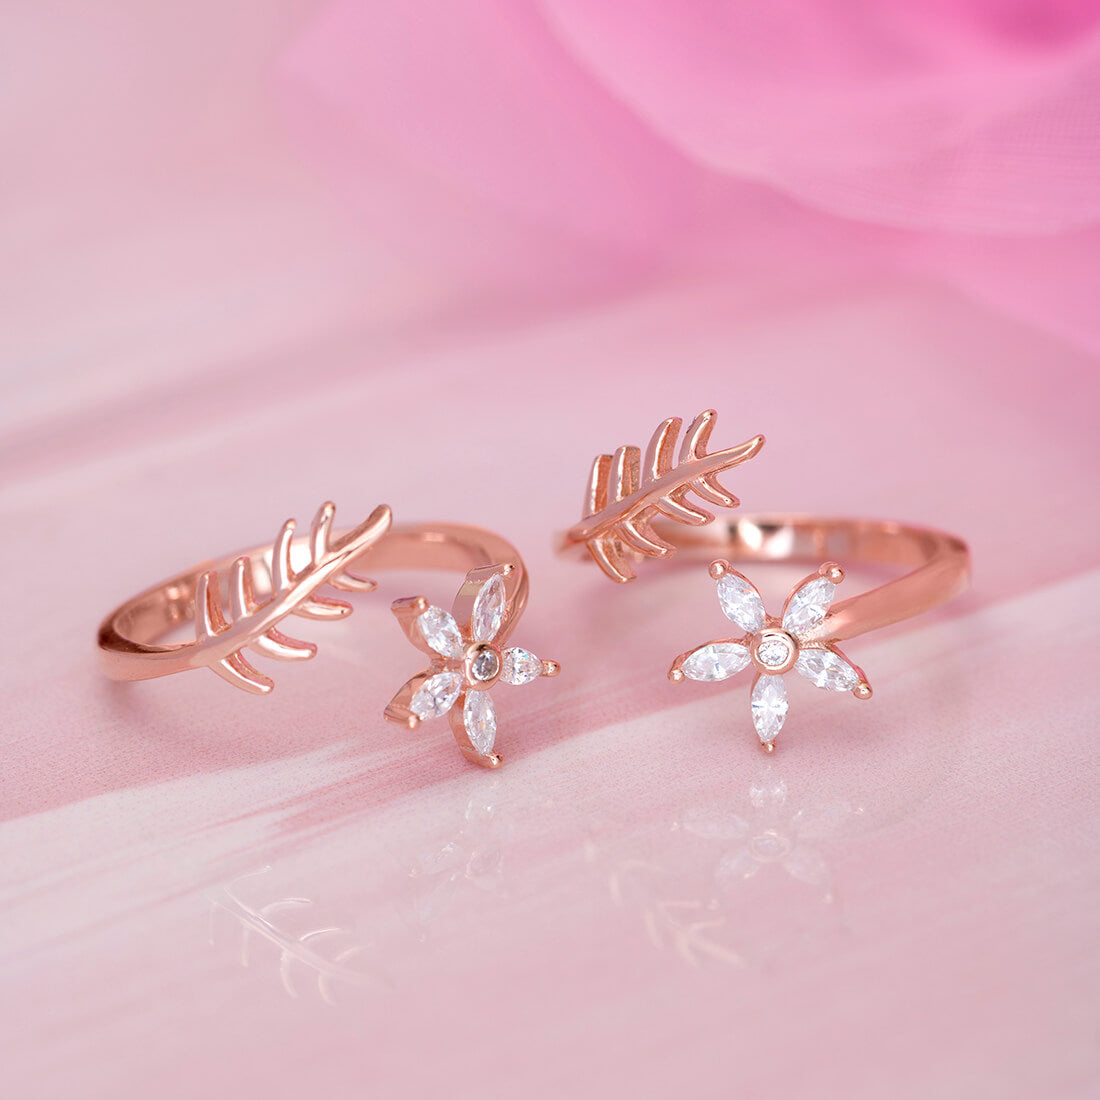 Touch of nature Rose Gold 925 Silver Toe Ring